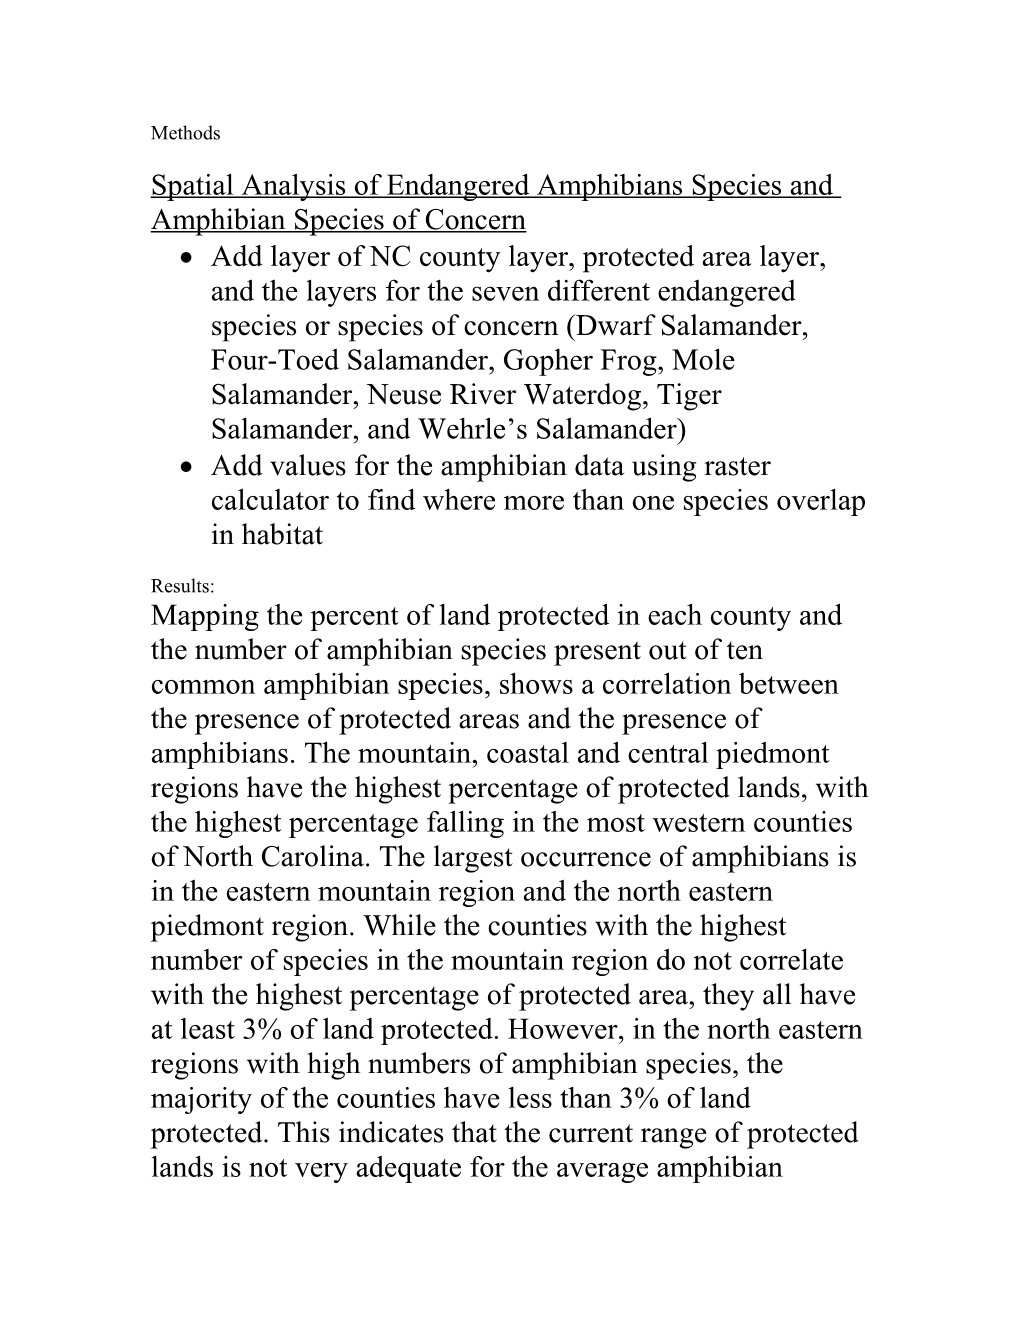 Spatial Analysis of Endangered Amphibians Species and Amphibian Species of Concern